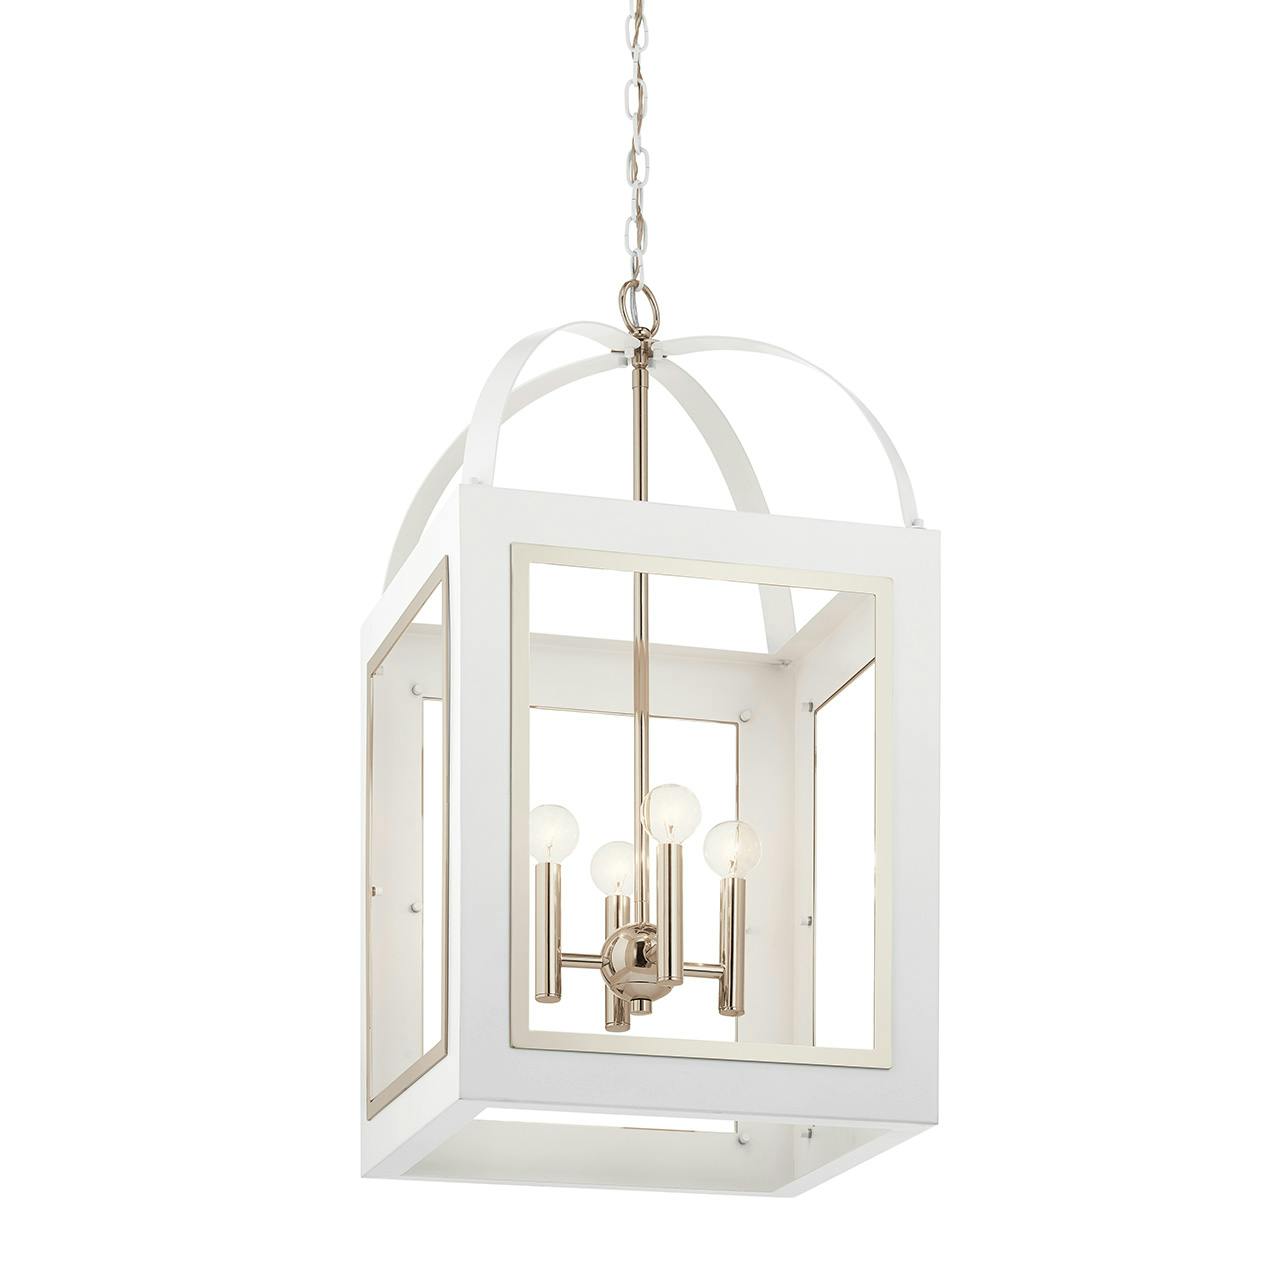 Vath™ 16" 4 Light Foyer Pendant White without the canopy on a white background